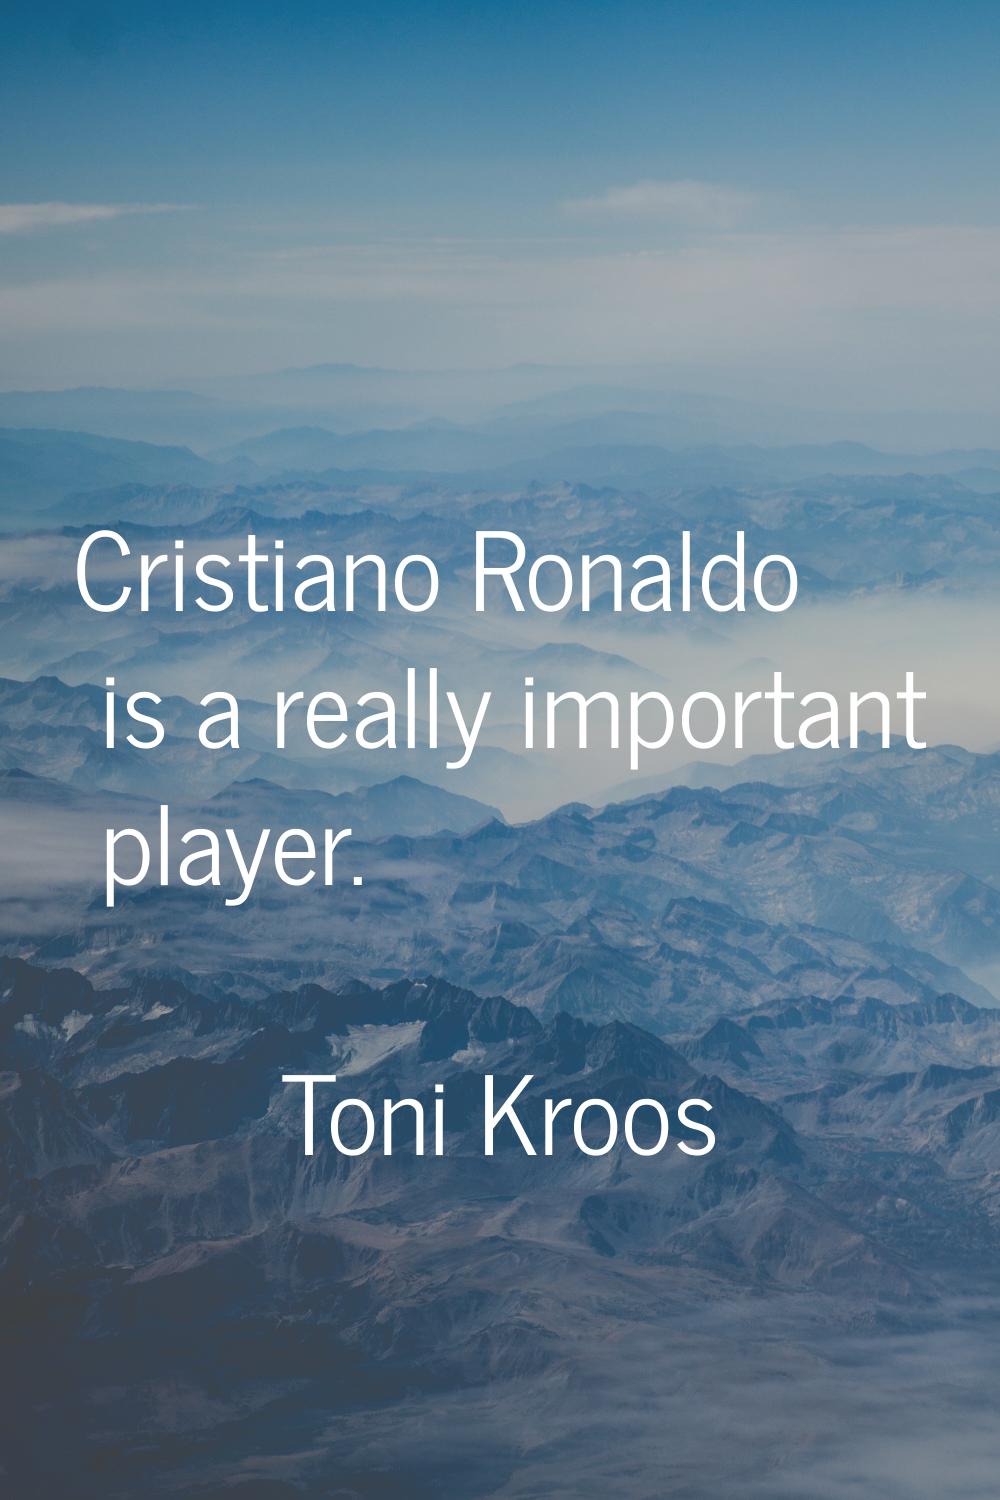 Cristiano Ronaldo is a really important player.